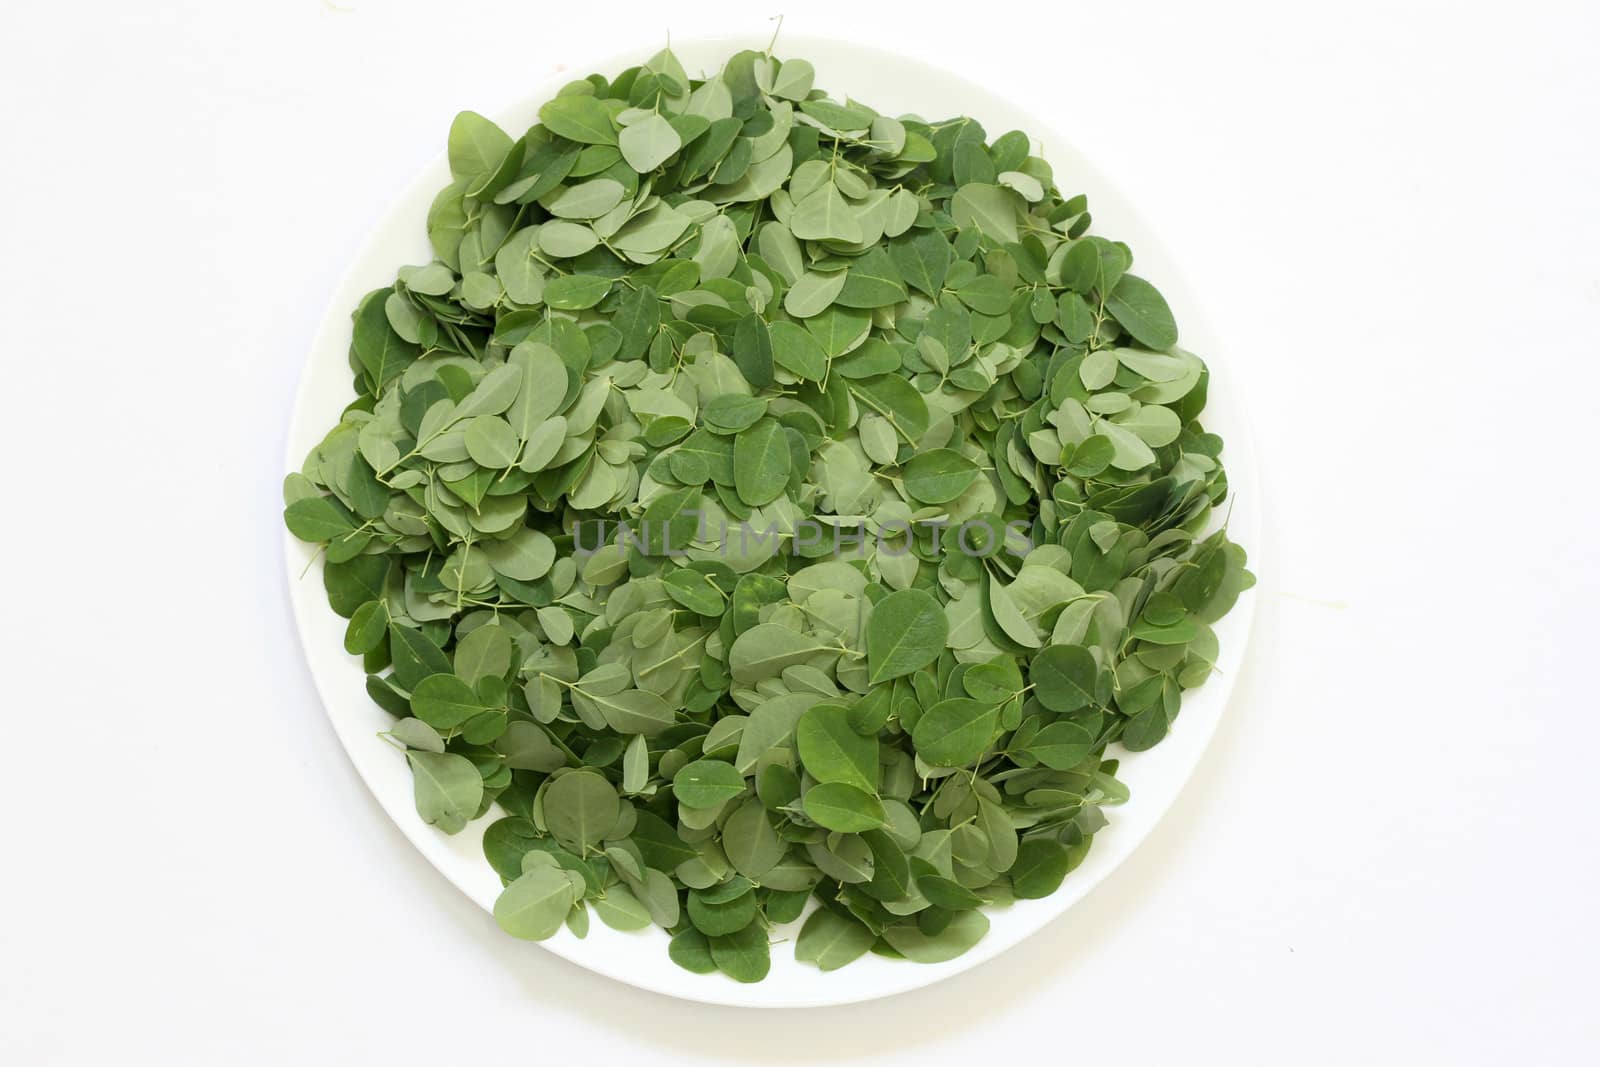 Moringa Oleifera leaves arranged in a plate with background